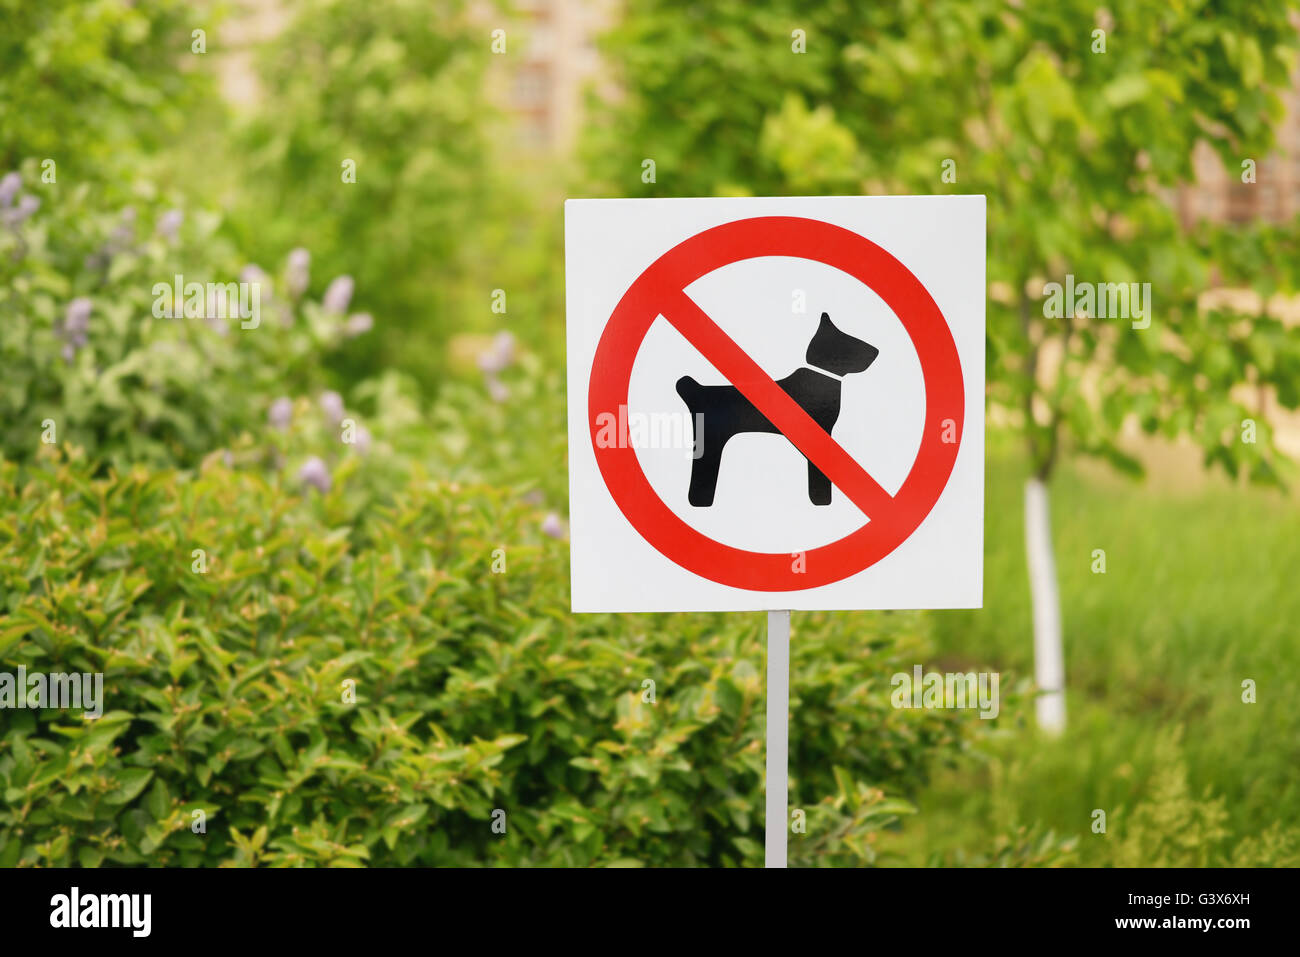 No dogs allowed sign in the park Stock Photo